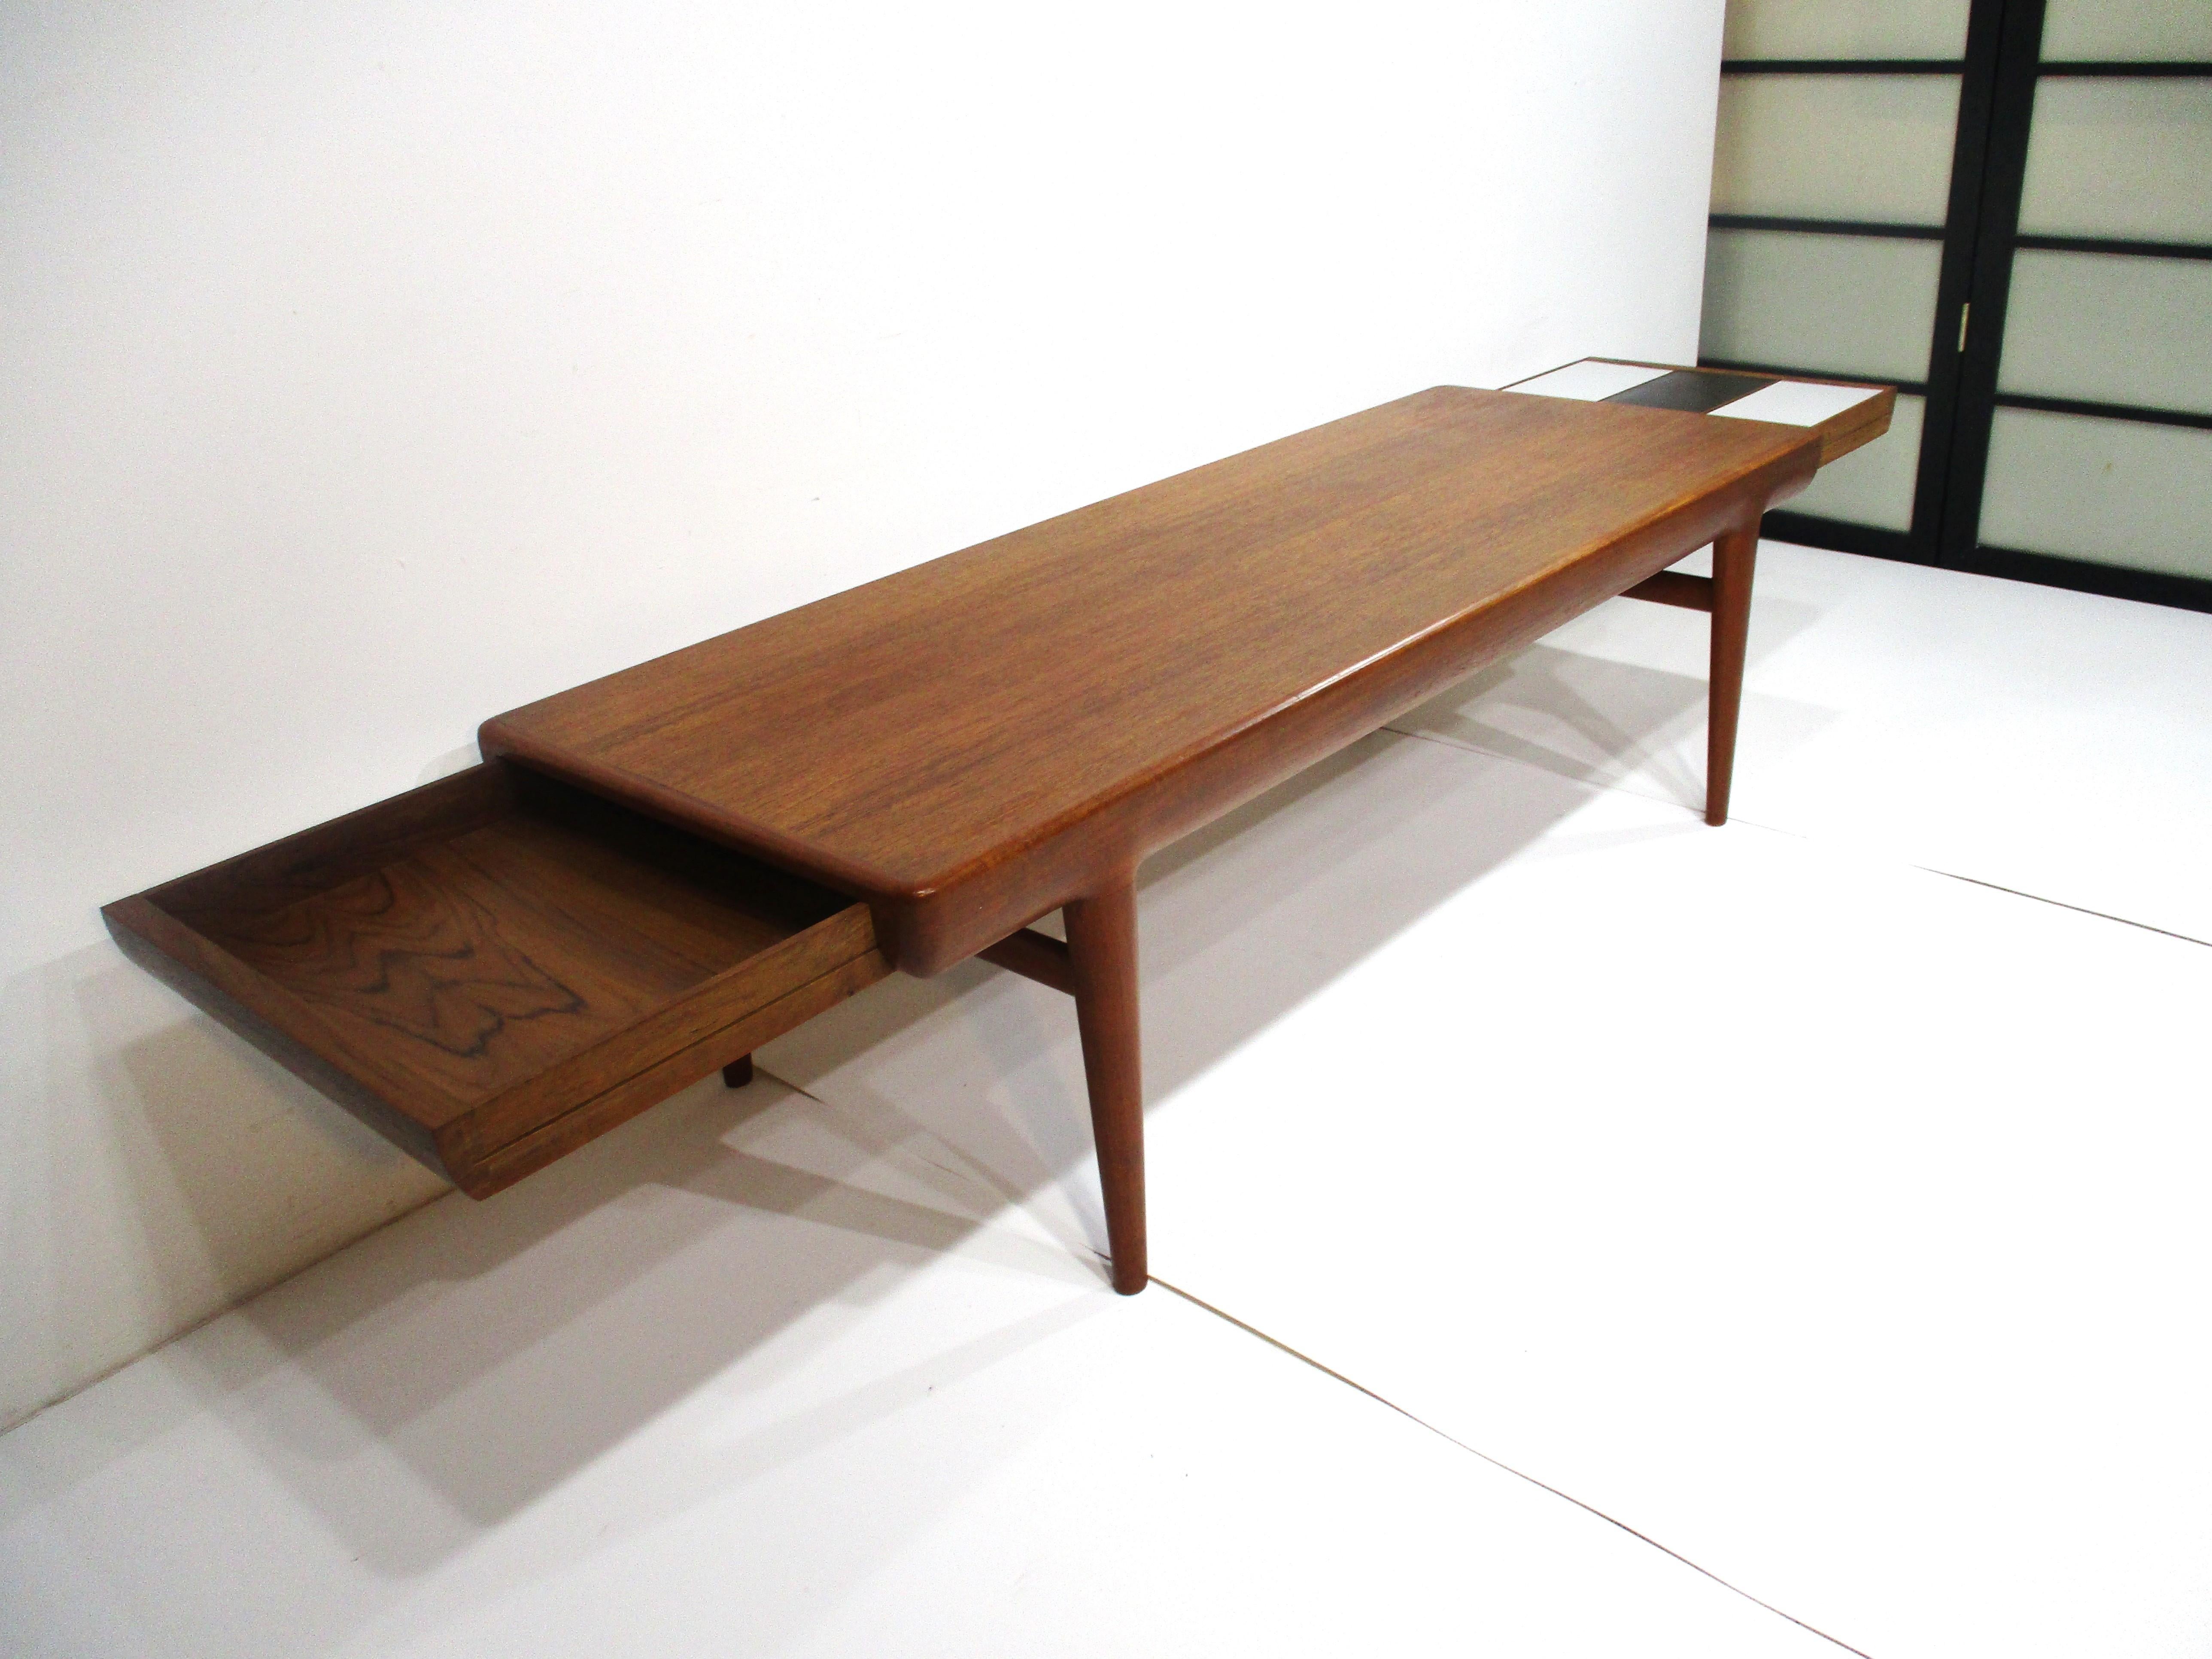 Teak Coffee Table w/ Pull Out Ends by Silkeborg -Johannes Andersen Denmark  6